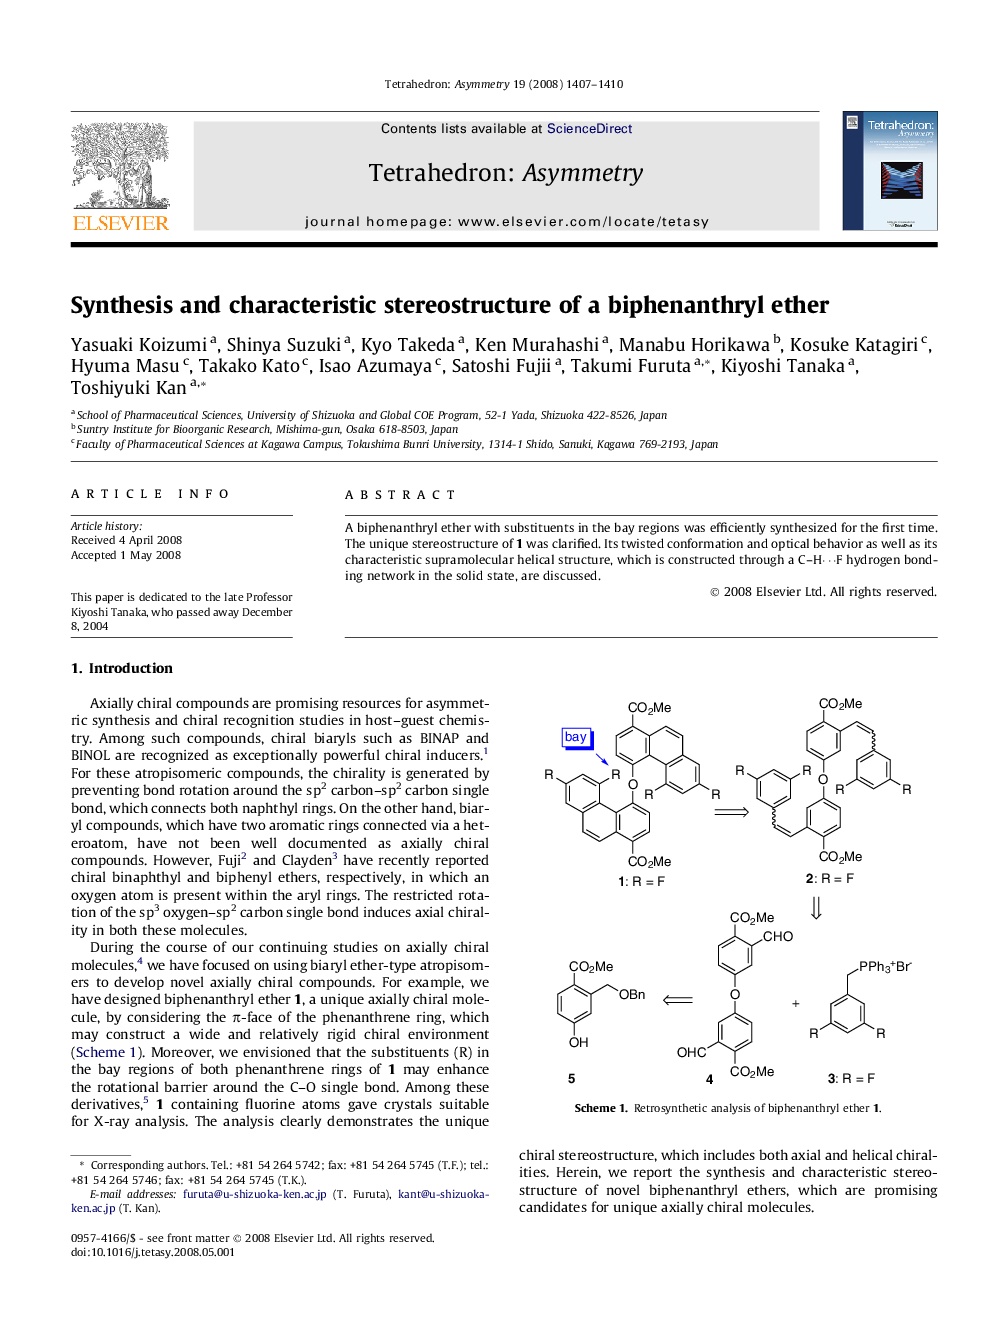 Synthesis and characteristic stereostructure of a biphenanthryl ether